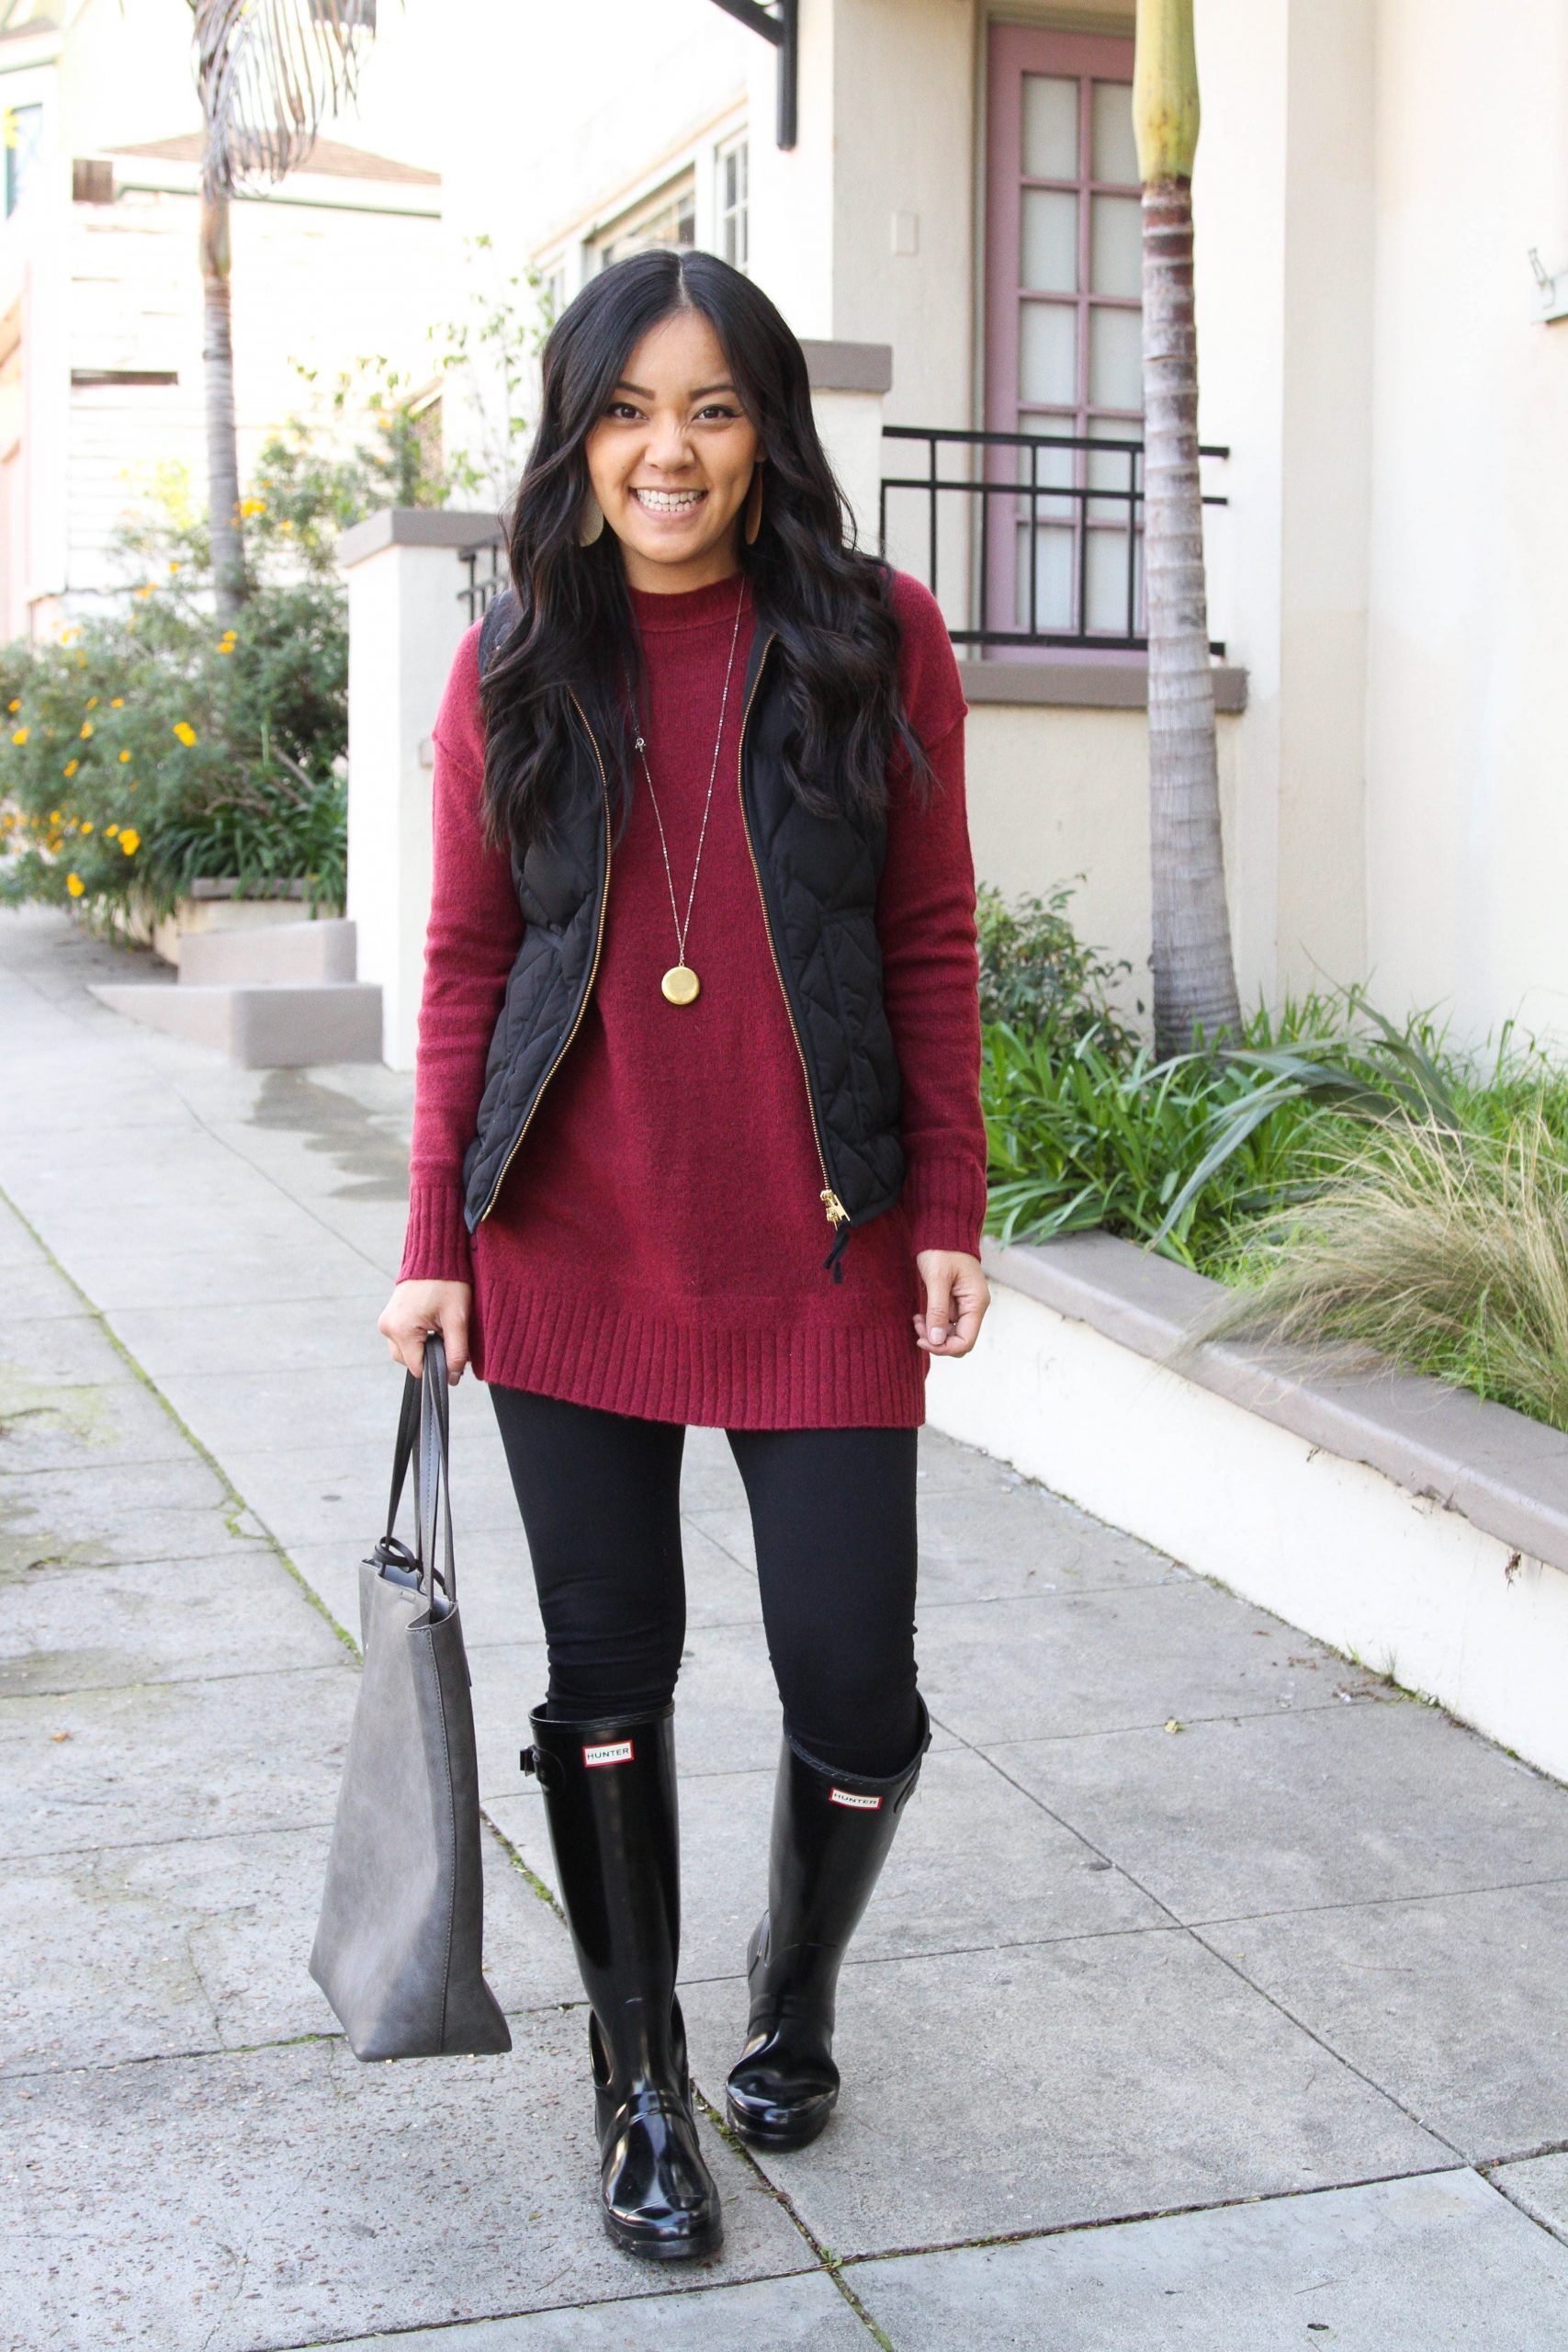 Three Winter Outfits With a Tunic Sweater – Sporty, Casual, Date -   17 dress Winter leggings ideas